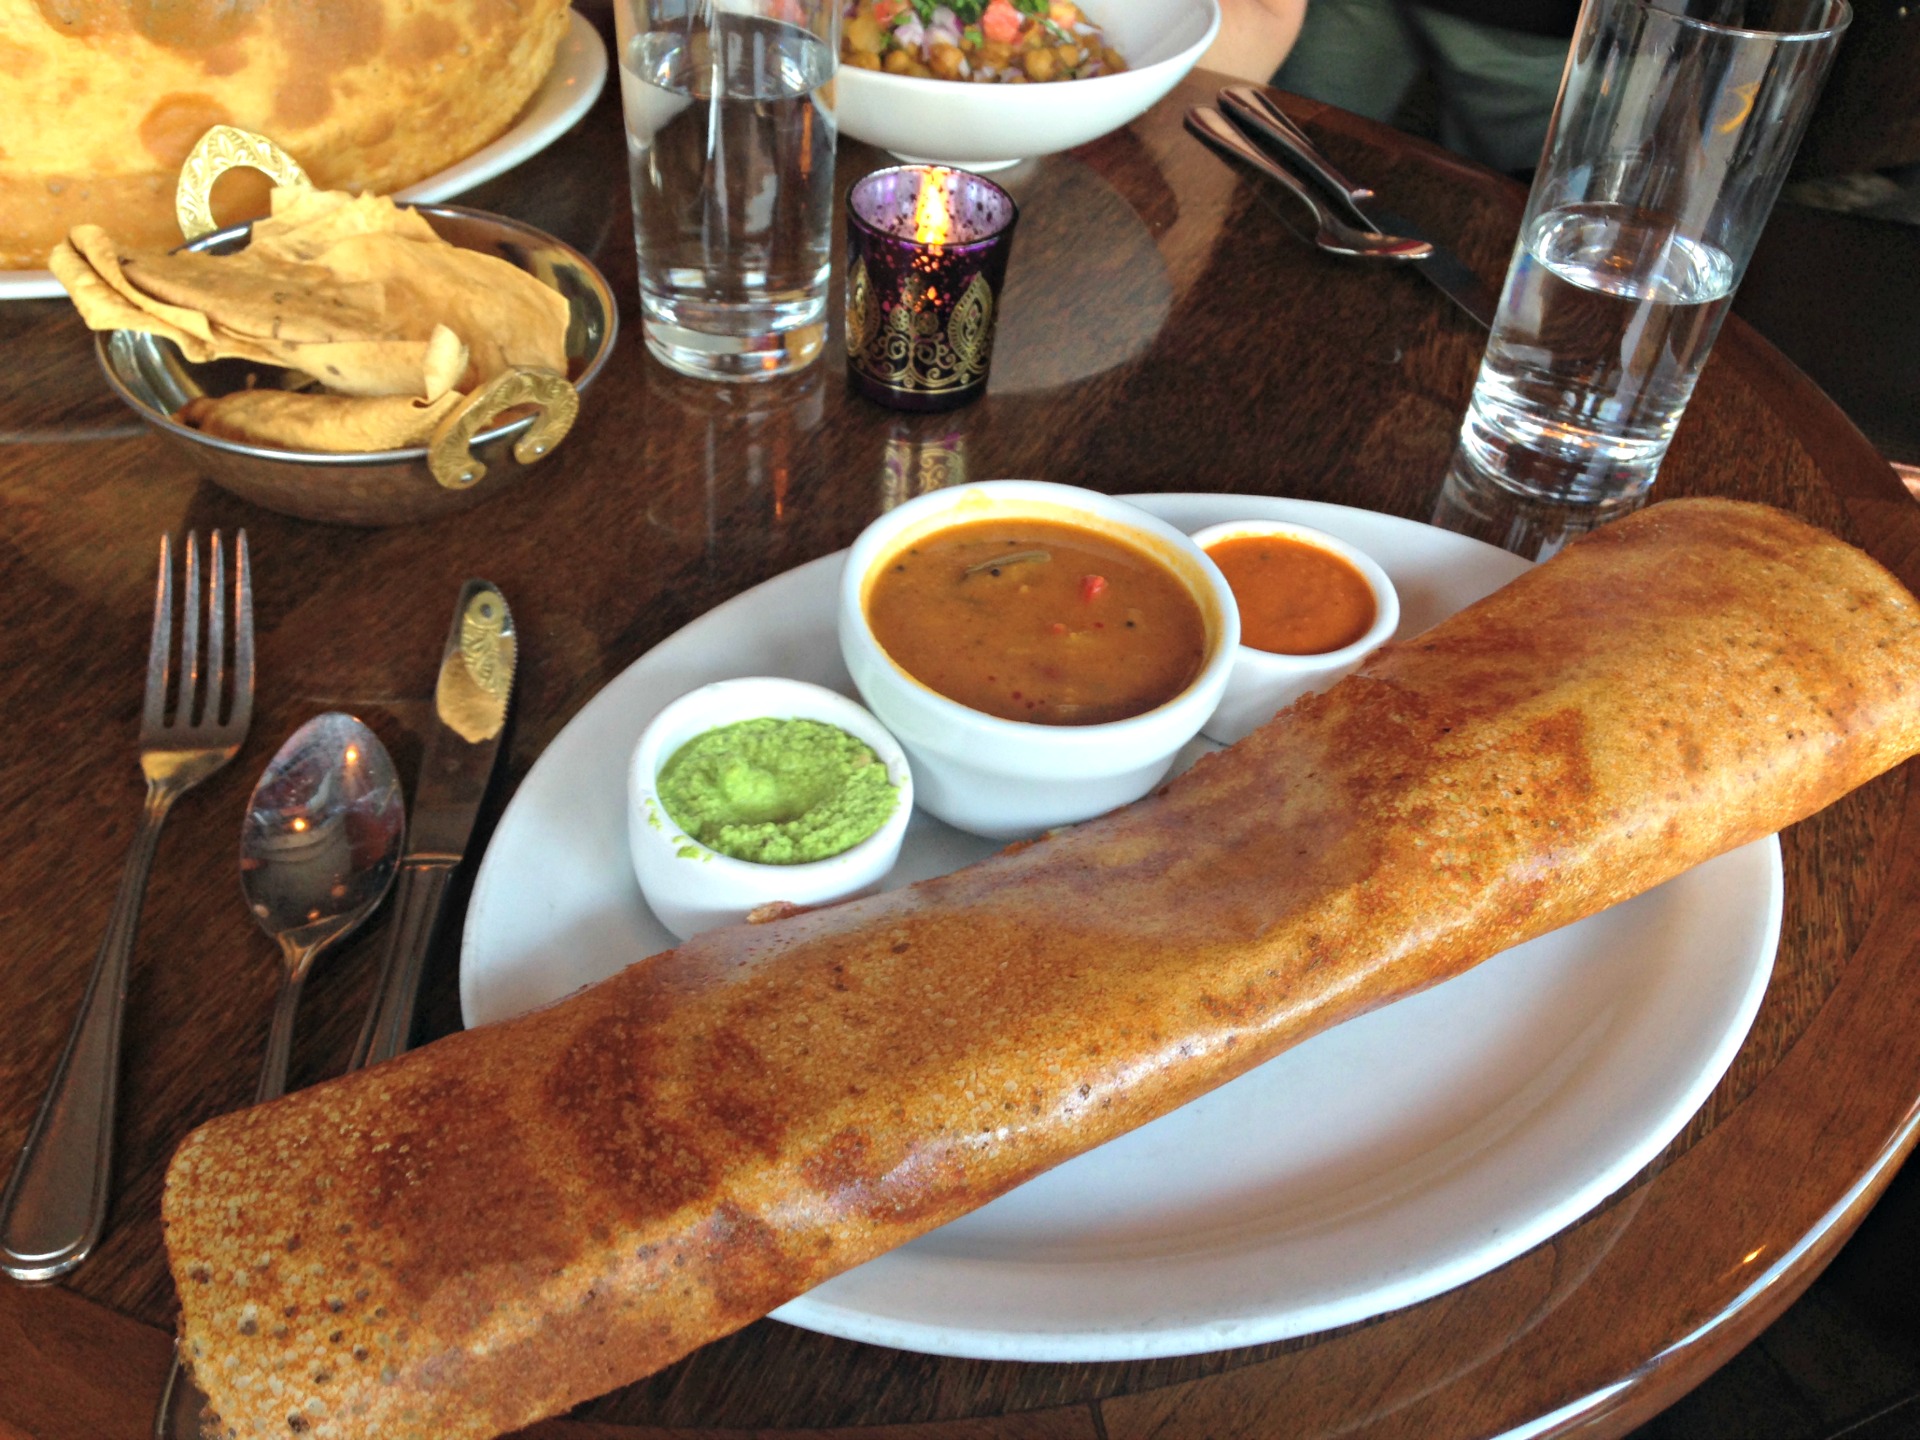 The truffle dosa from Dosa.